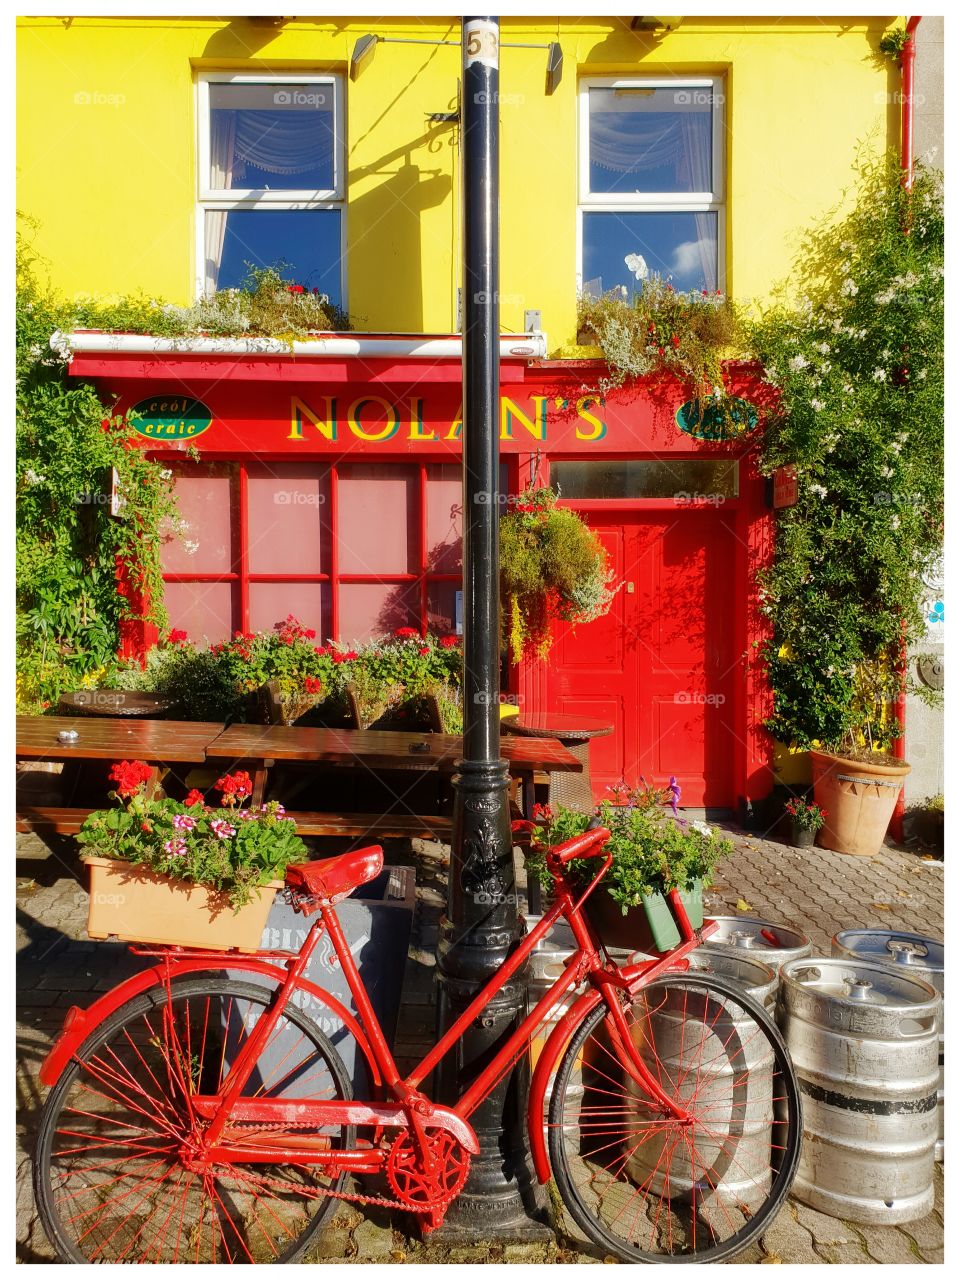 This is a pub in Ireland. I love the bright colors.